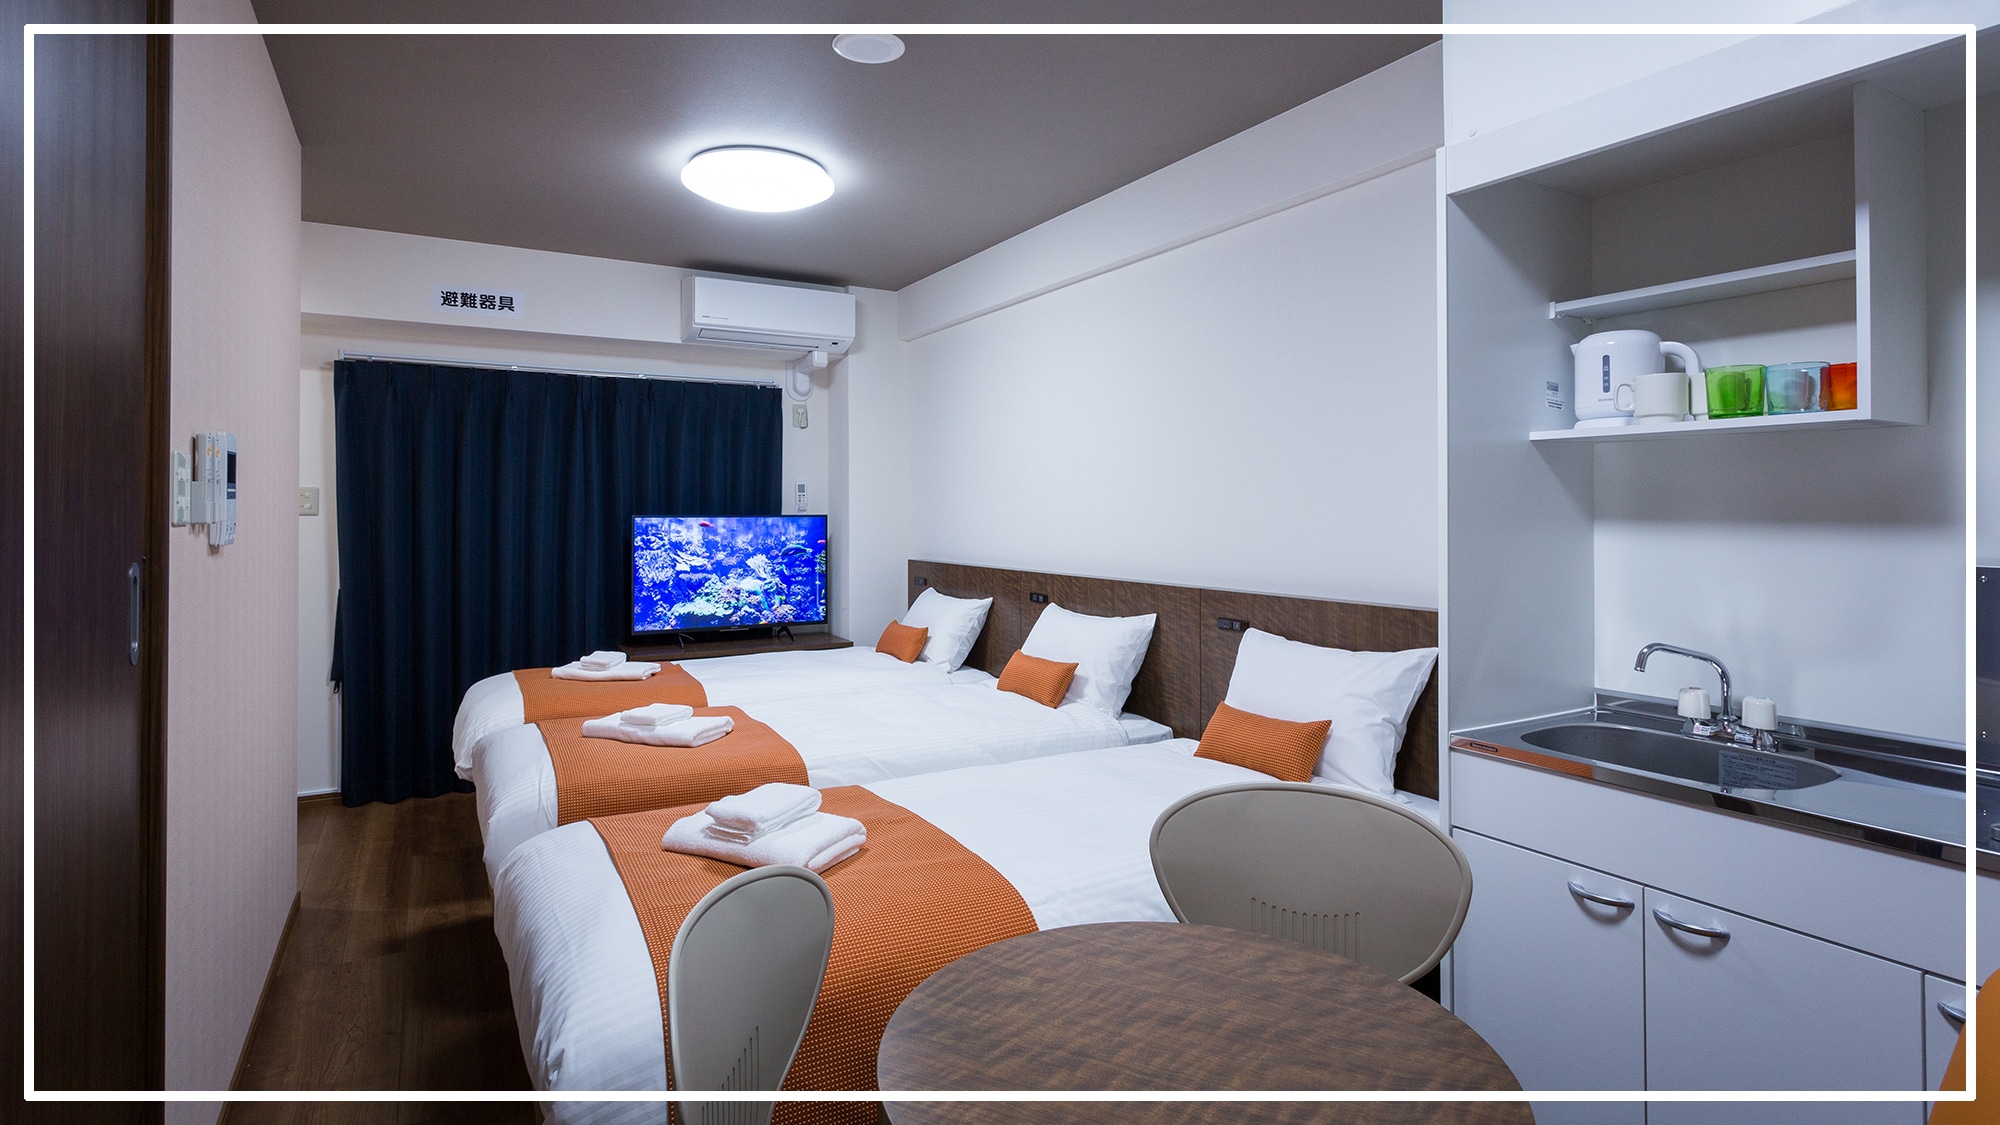 [Joy Triple] 25.2㎡ 3 comfortable French beds lined up, perfect for a good friend's trip!